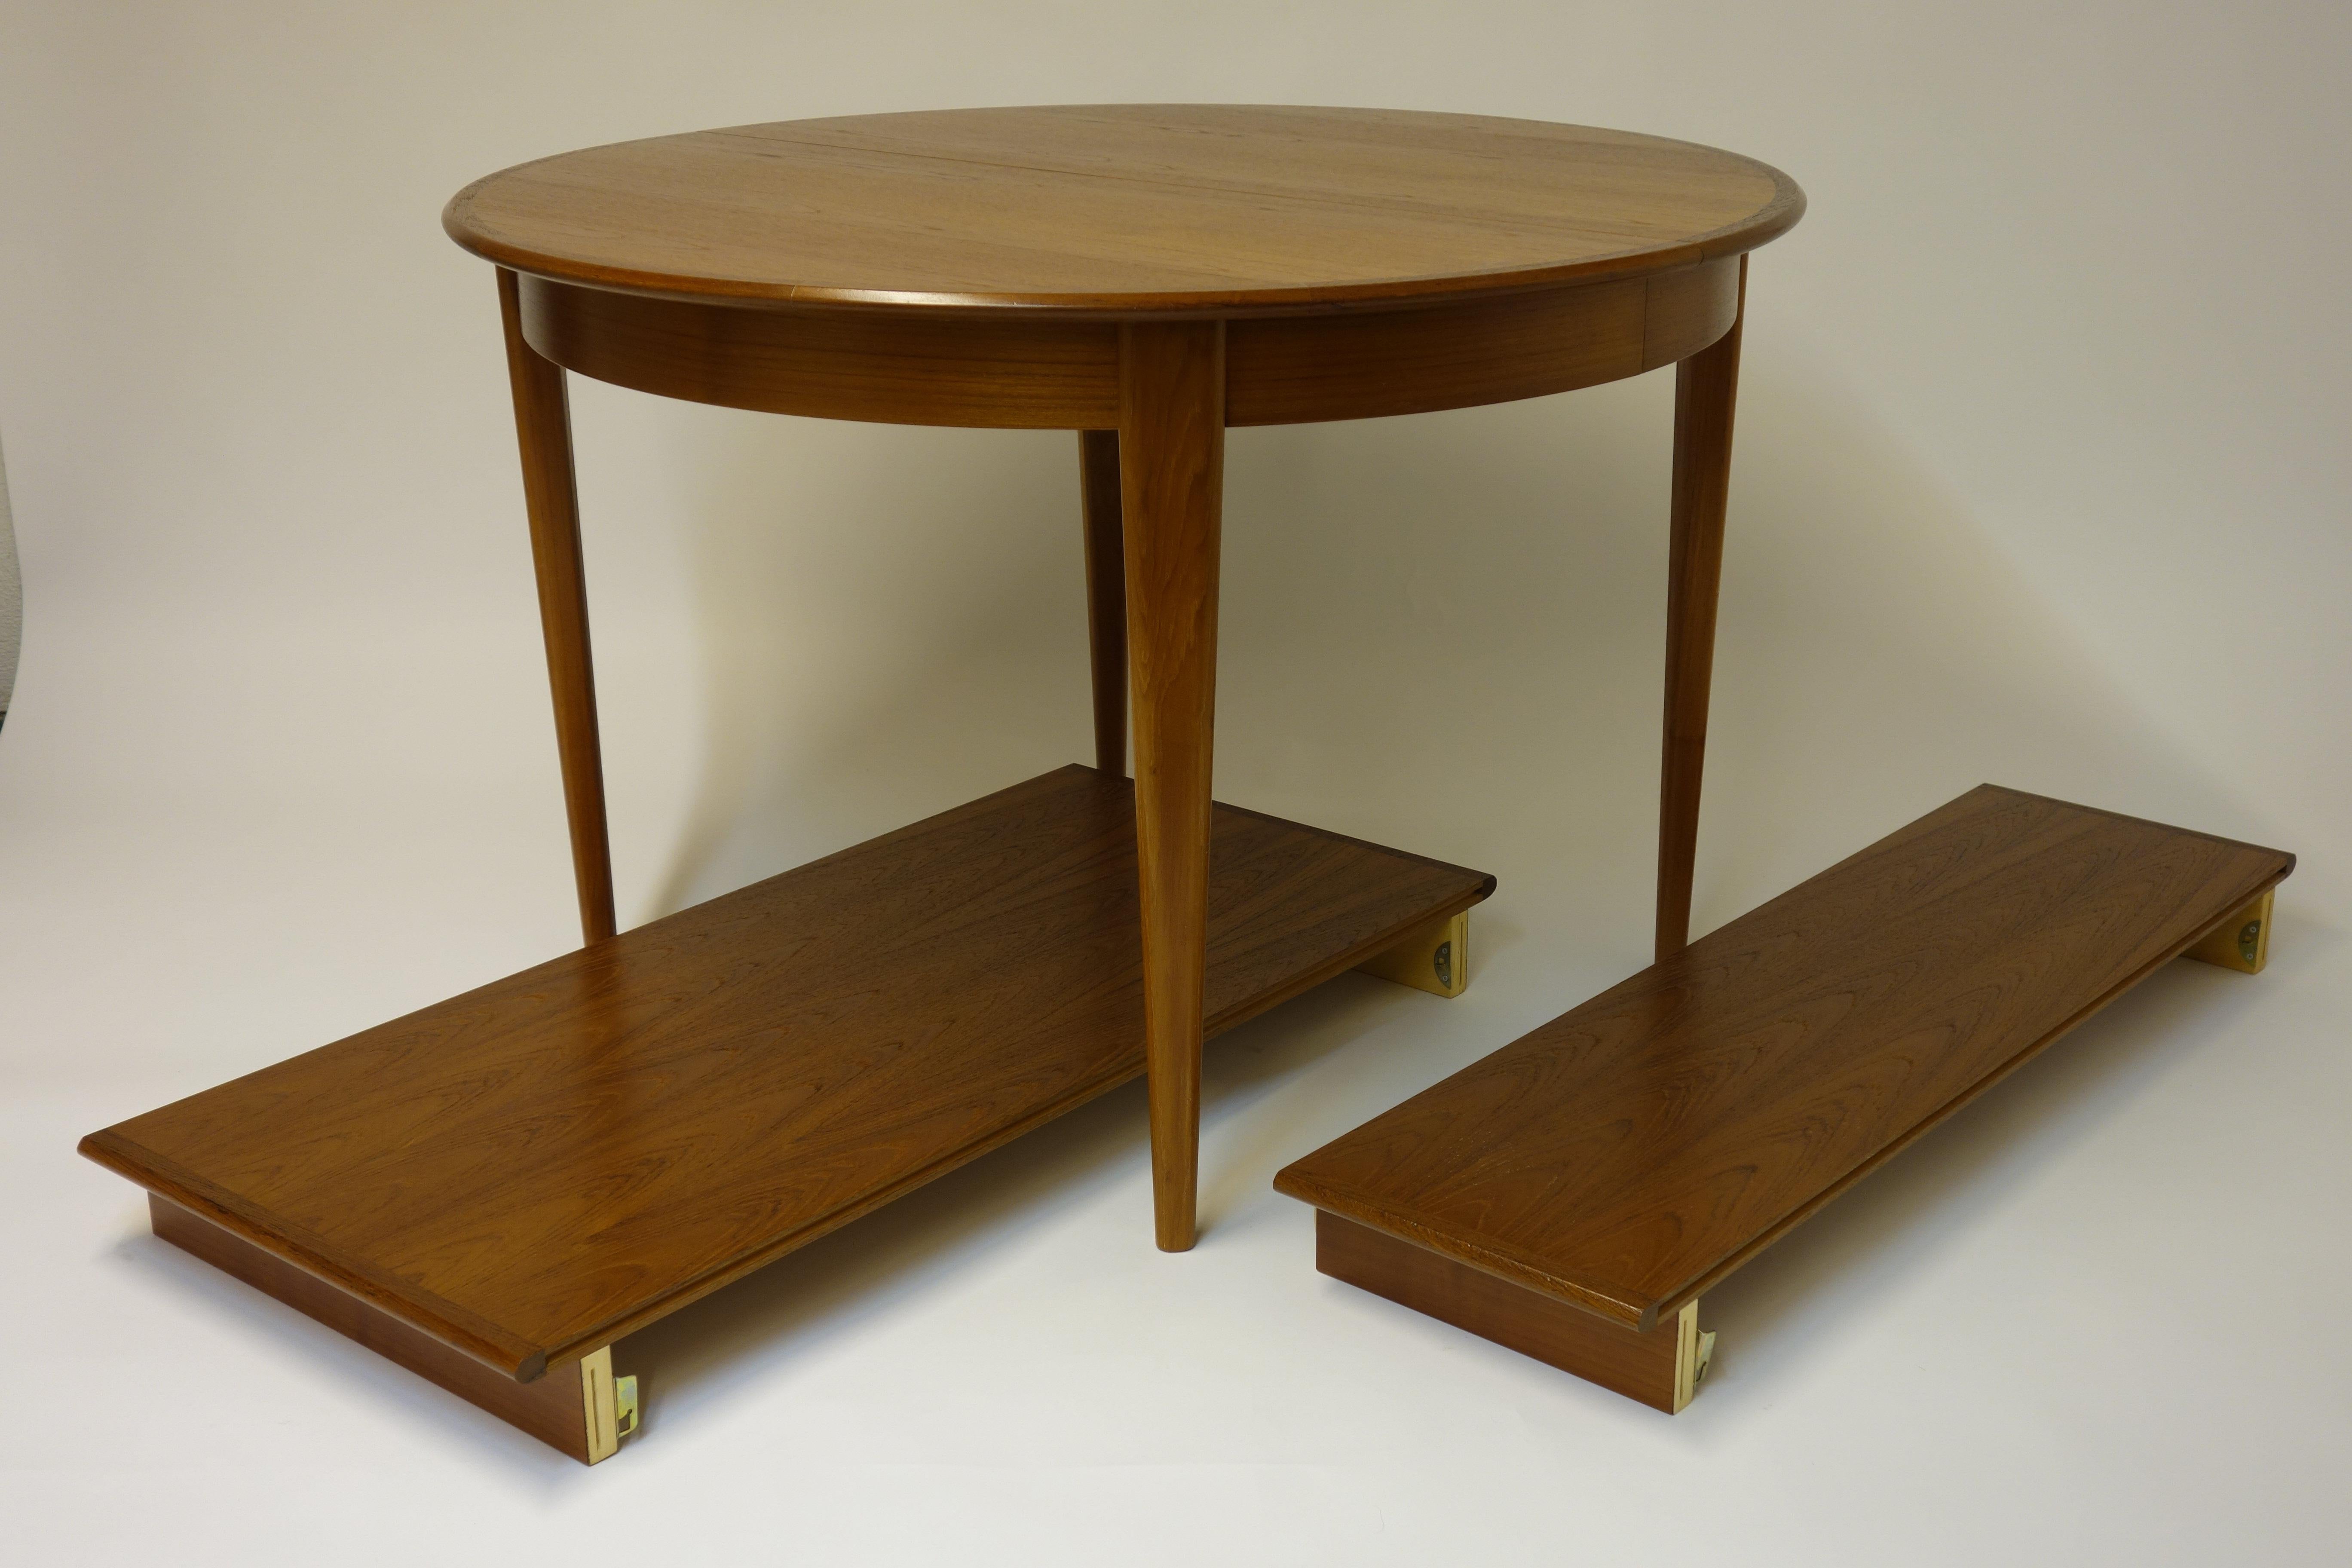 Dining Set by Johannes Andersen Teakwood Design Denmark 1960s diningtable chairs In Good Condition For Sale In Vienna, AT